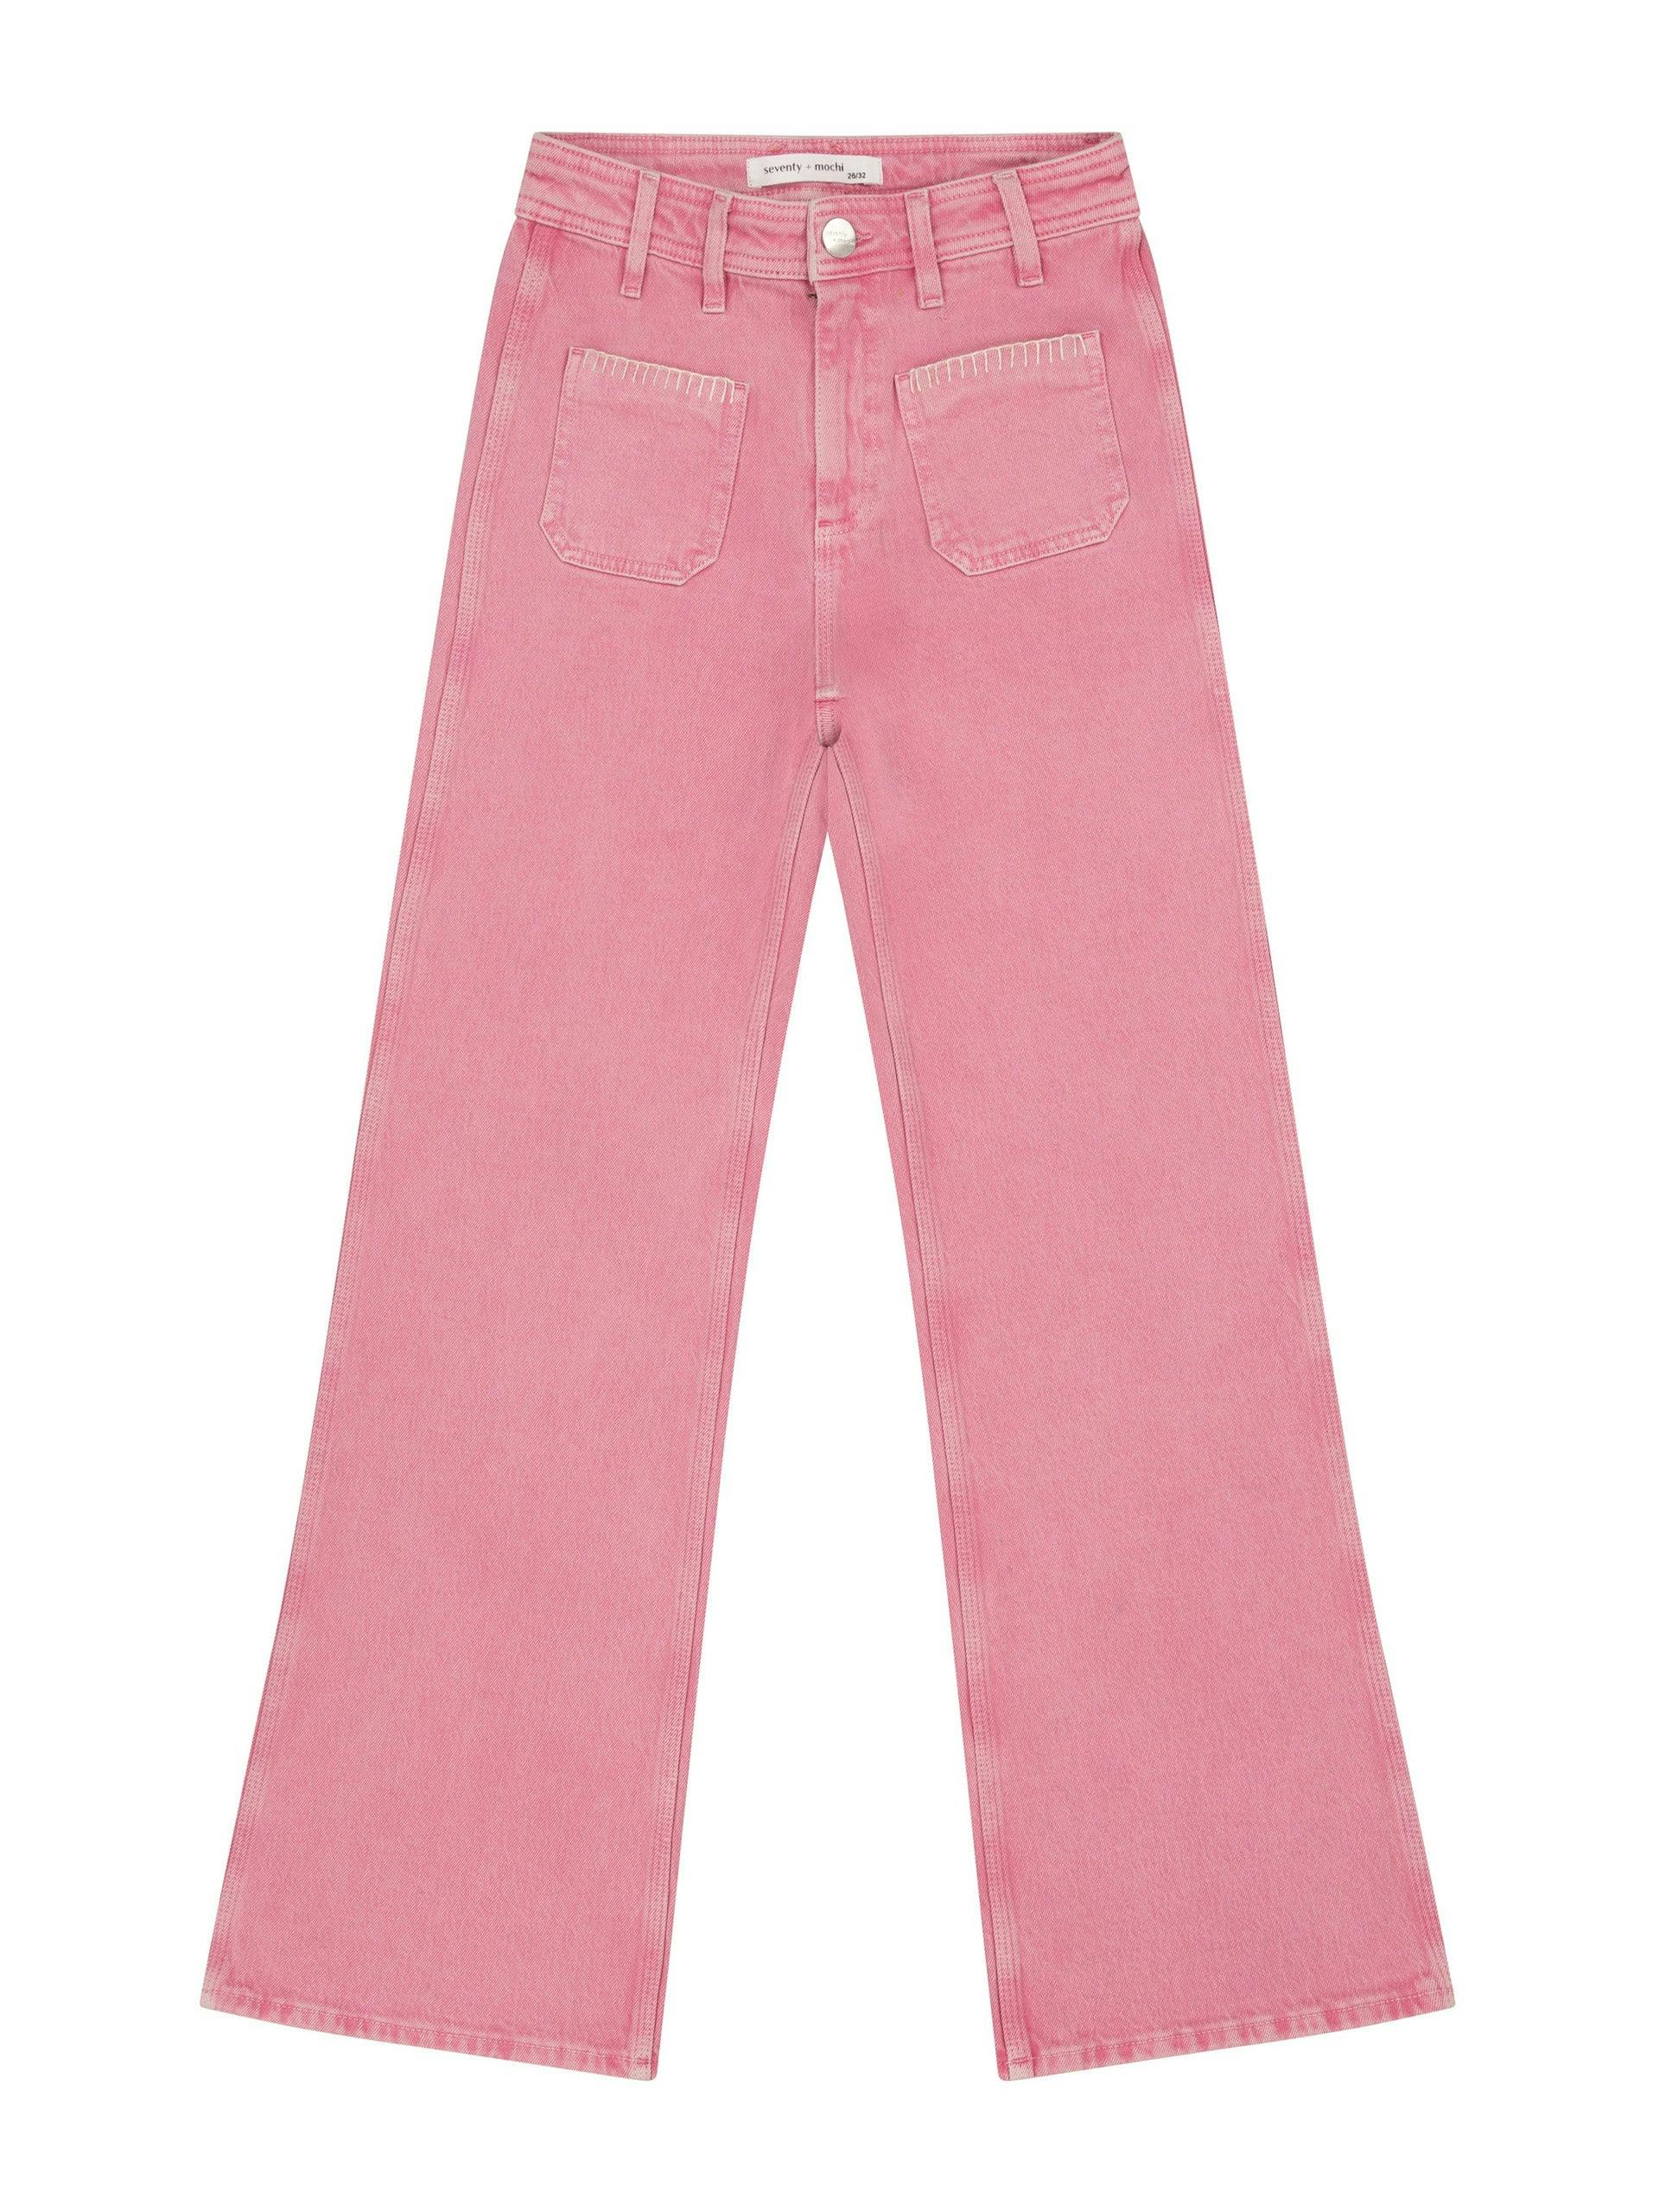 Washed candy floss patched pocket Mabel jean